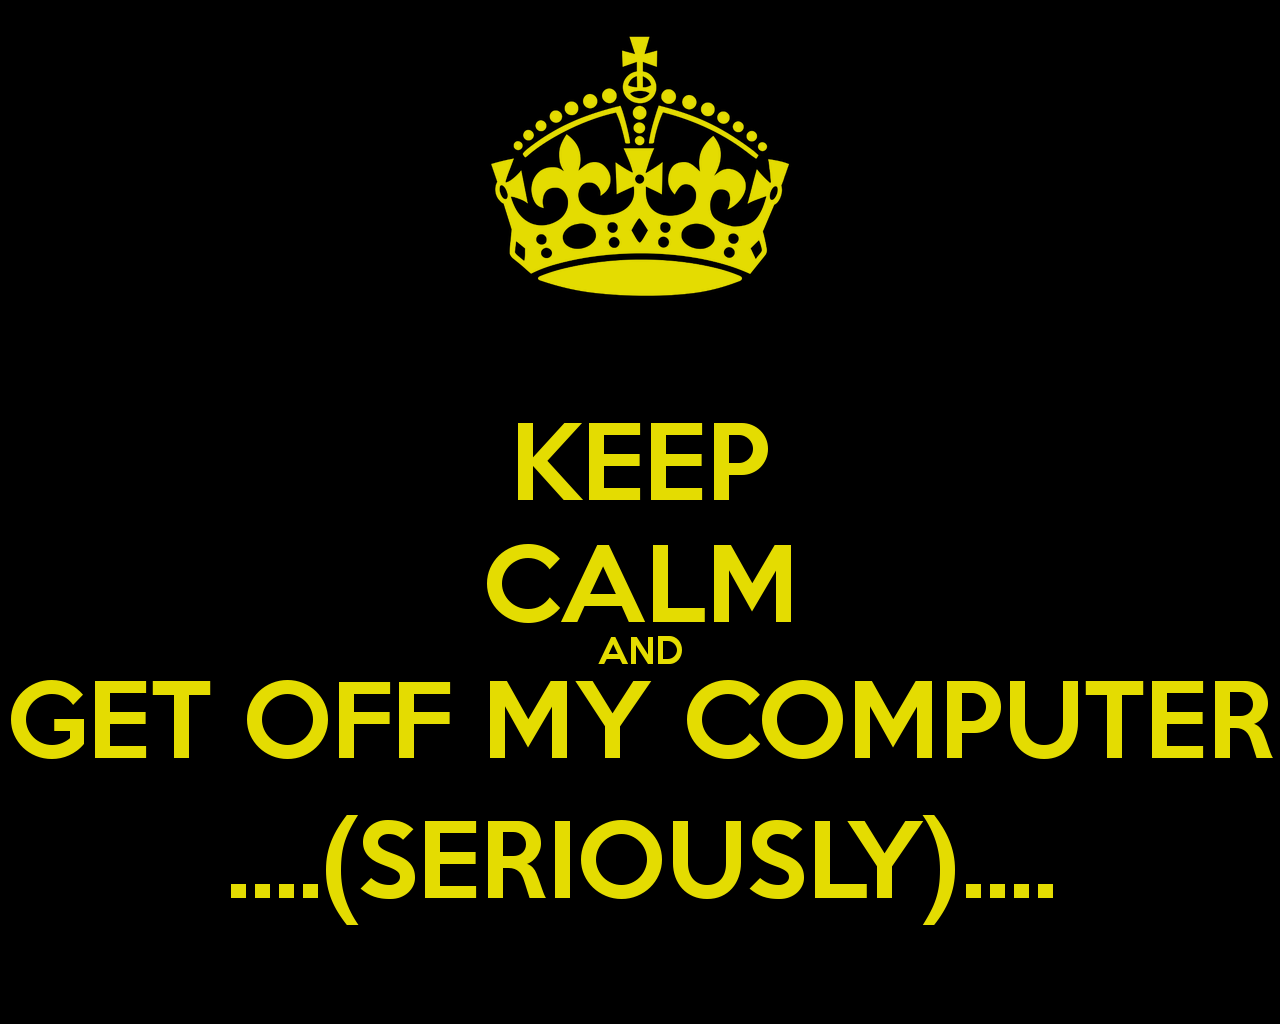 Free download KEEP CALM AND GET OFF MY COMPUTER SERIOUSLY